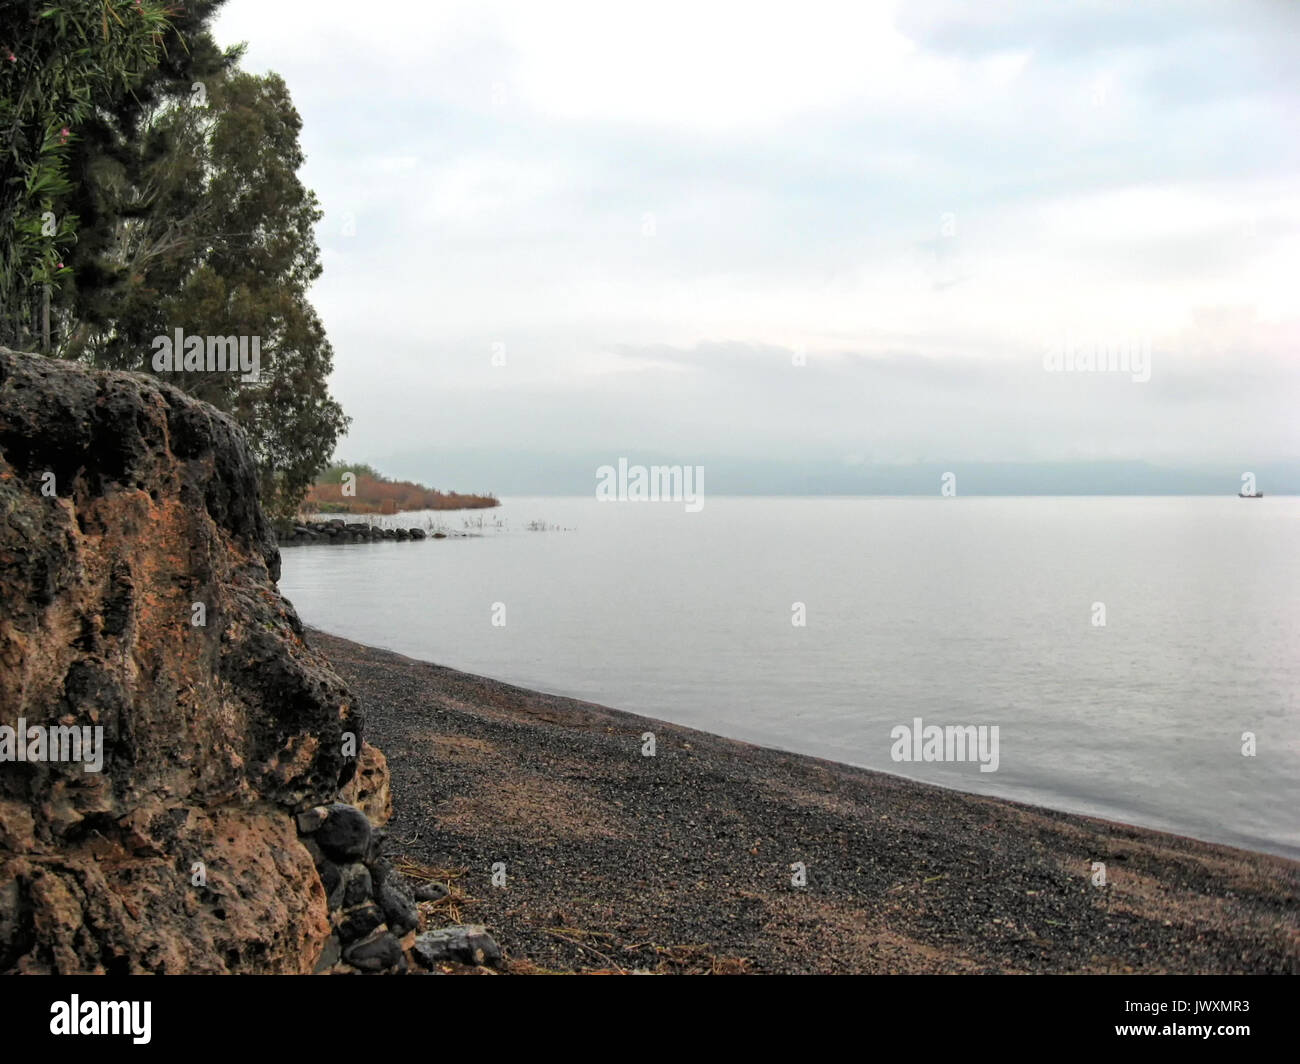 Dark basalt rock lines the western shore of the Sea of Galilee at Tabgha in Israel. Stock Photo